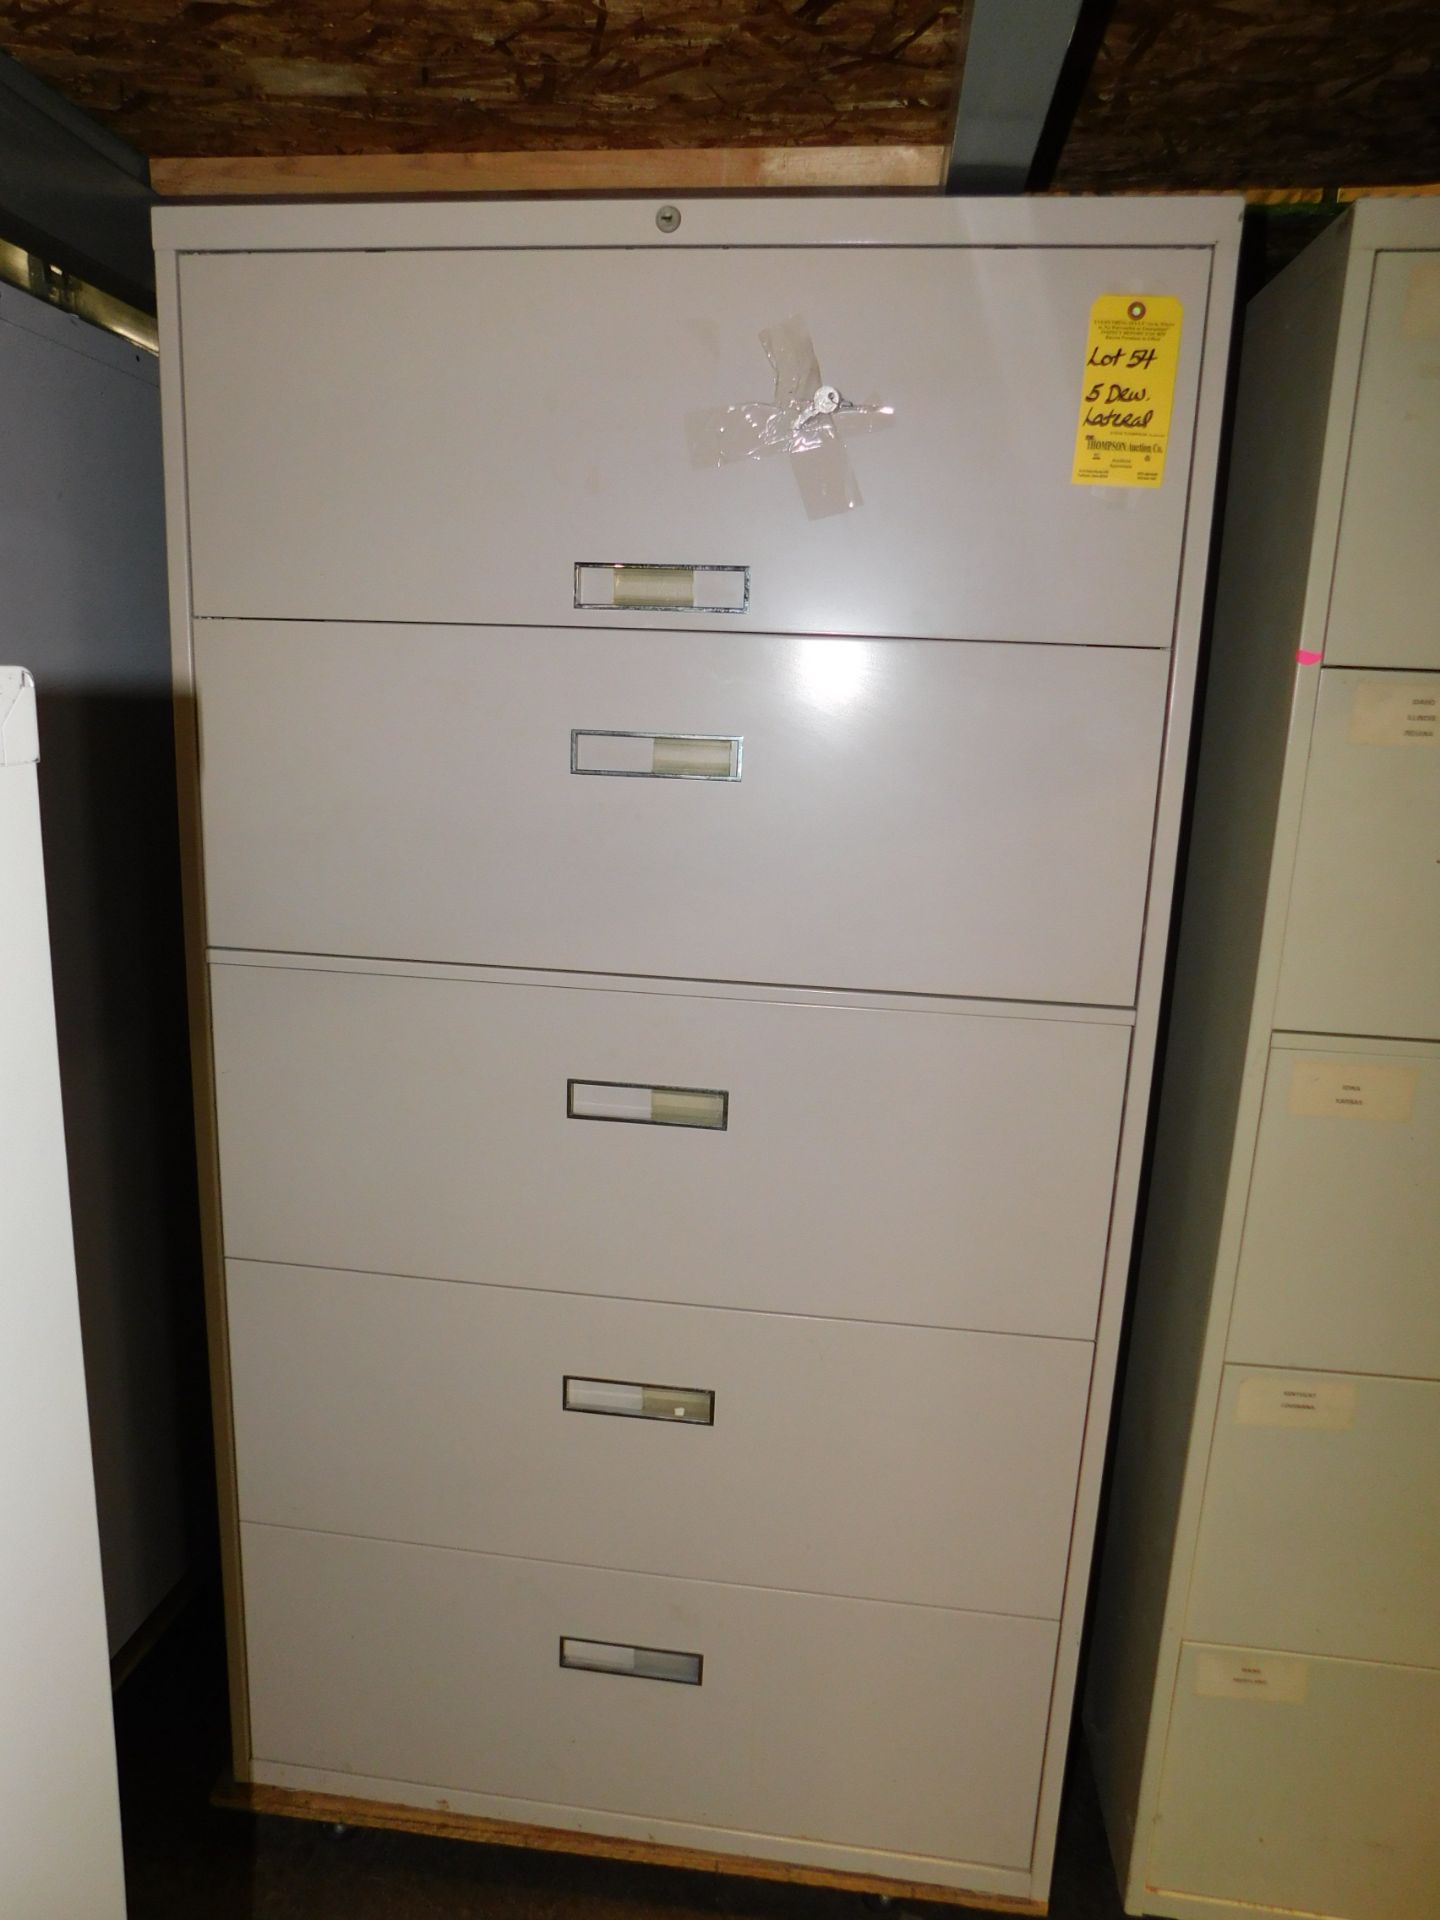 5-Drawer Lateral File